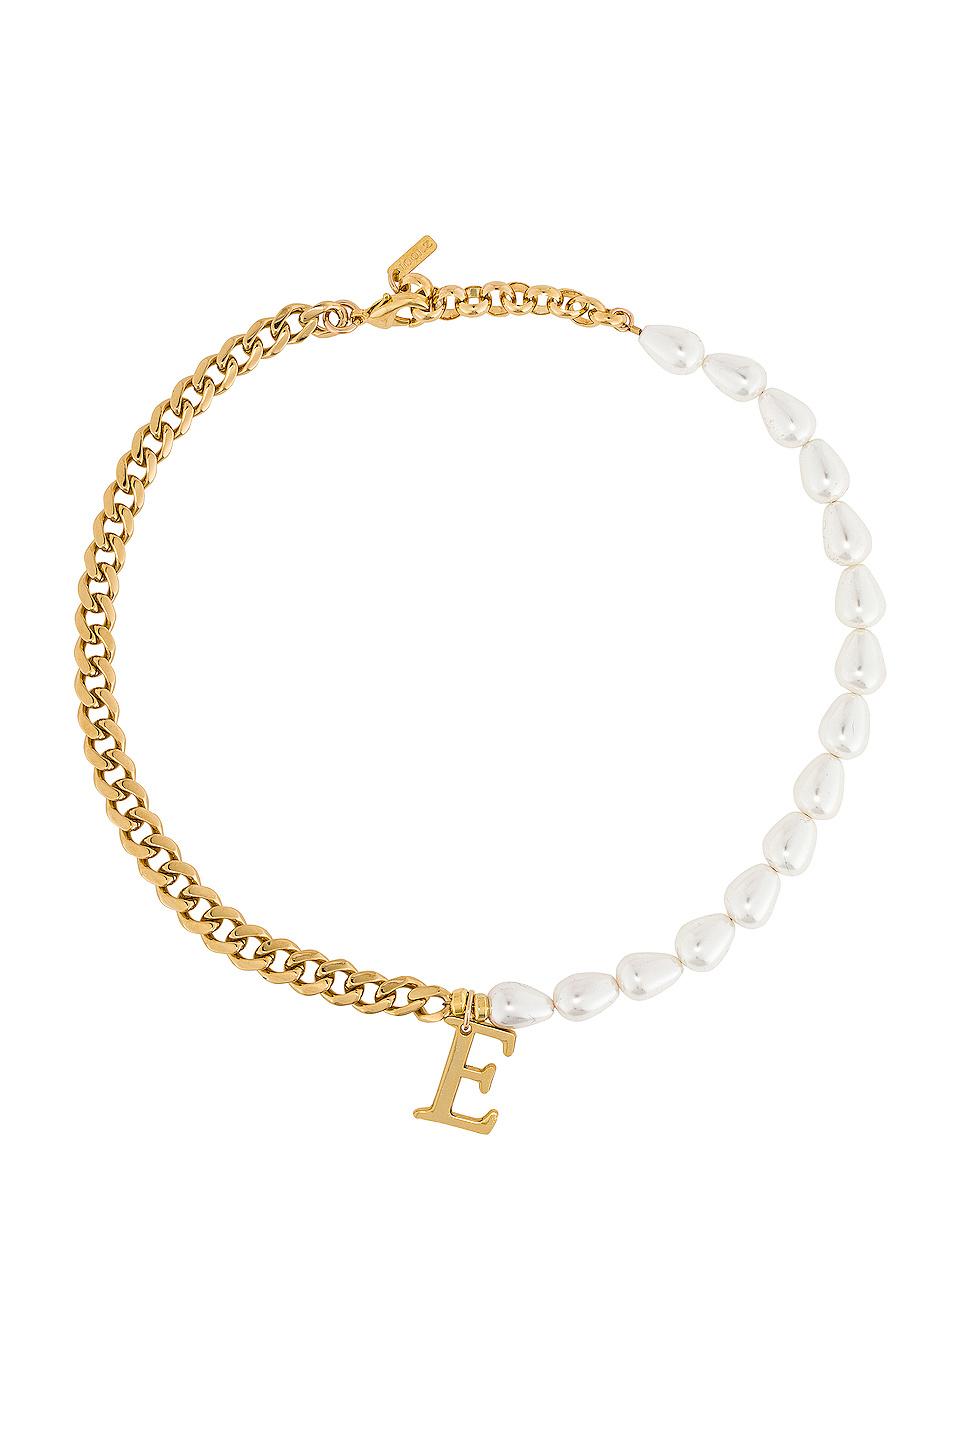 Gold Initial Remember Me Chain Bracelet with Letter K | Women's Jewelry by Uncommon James